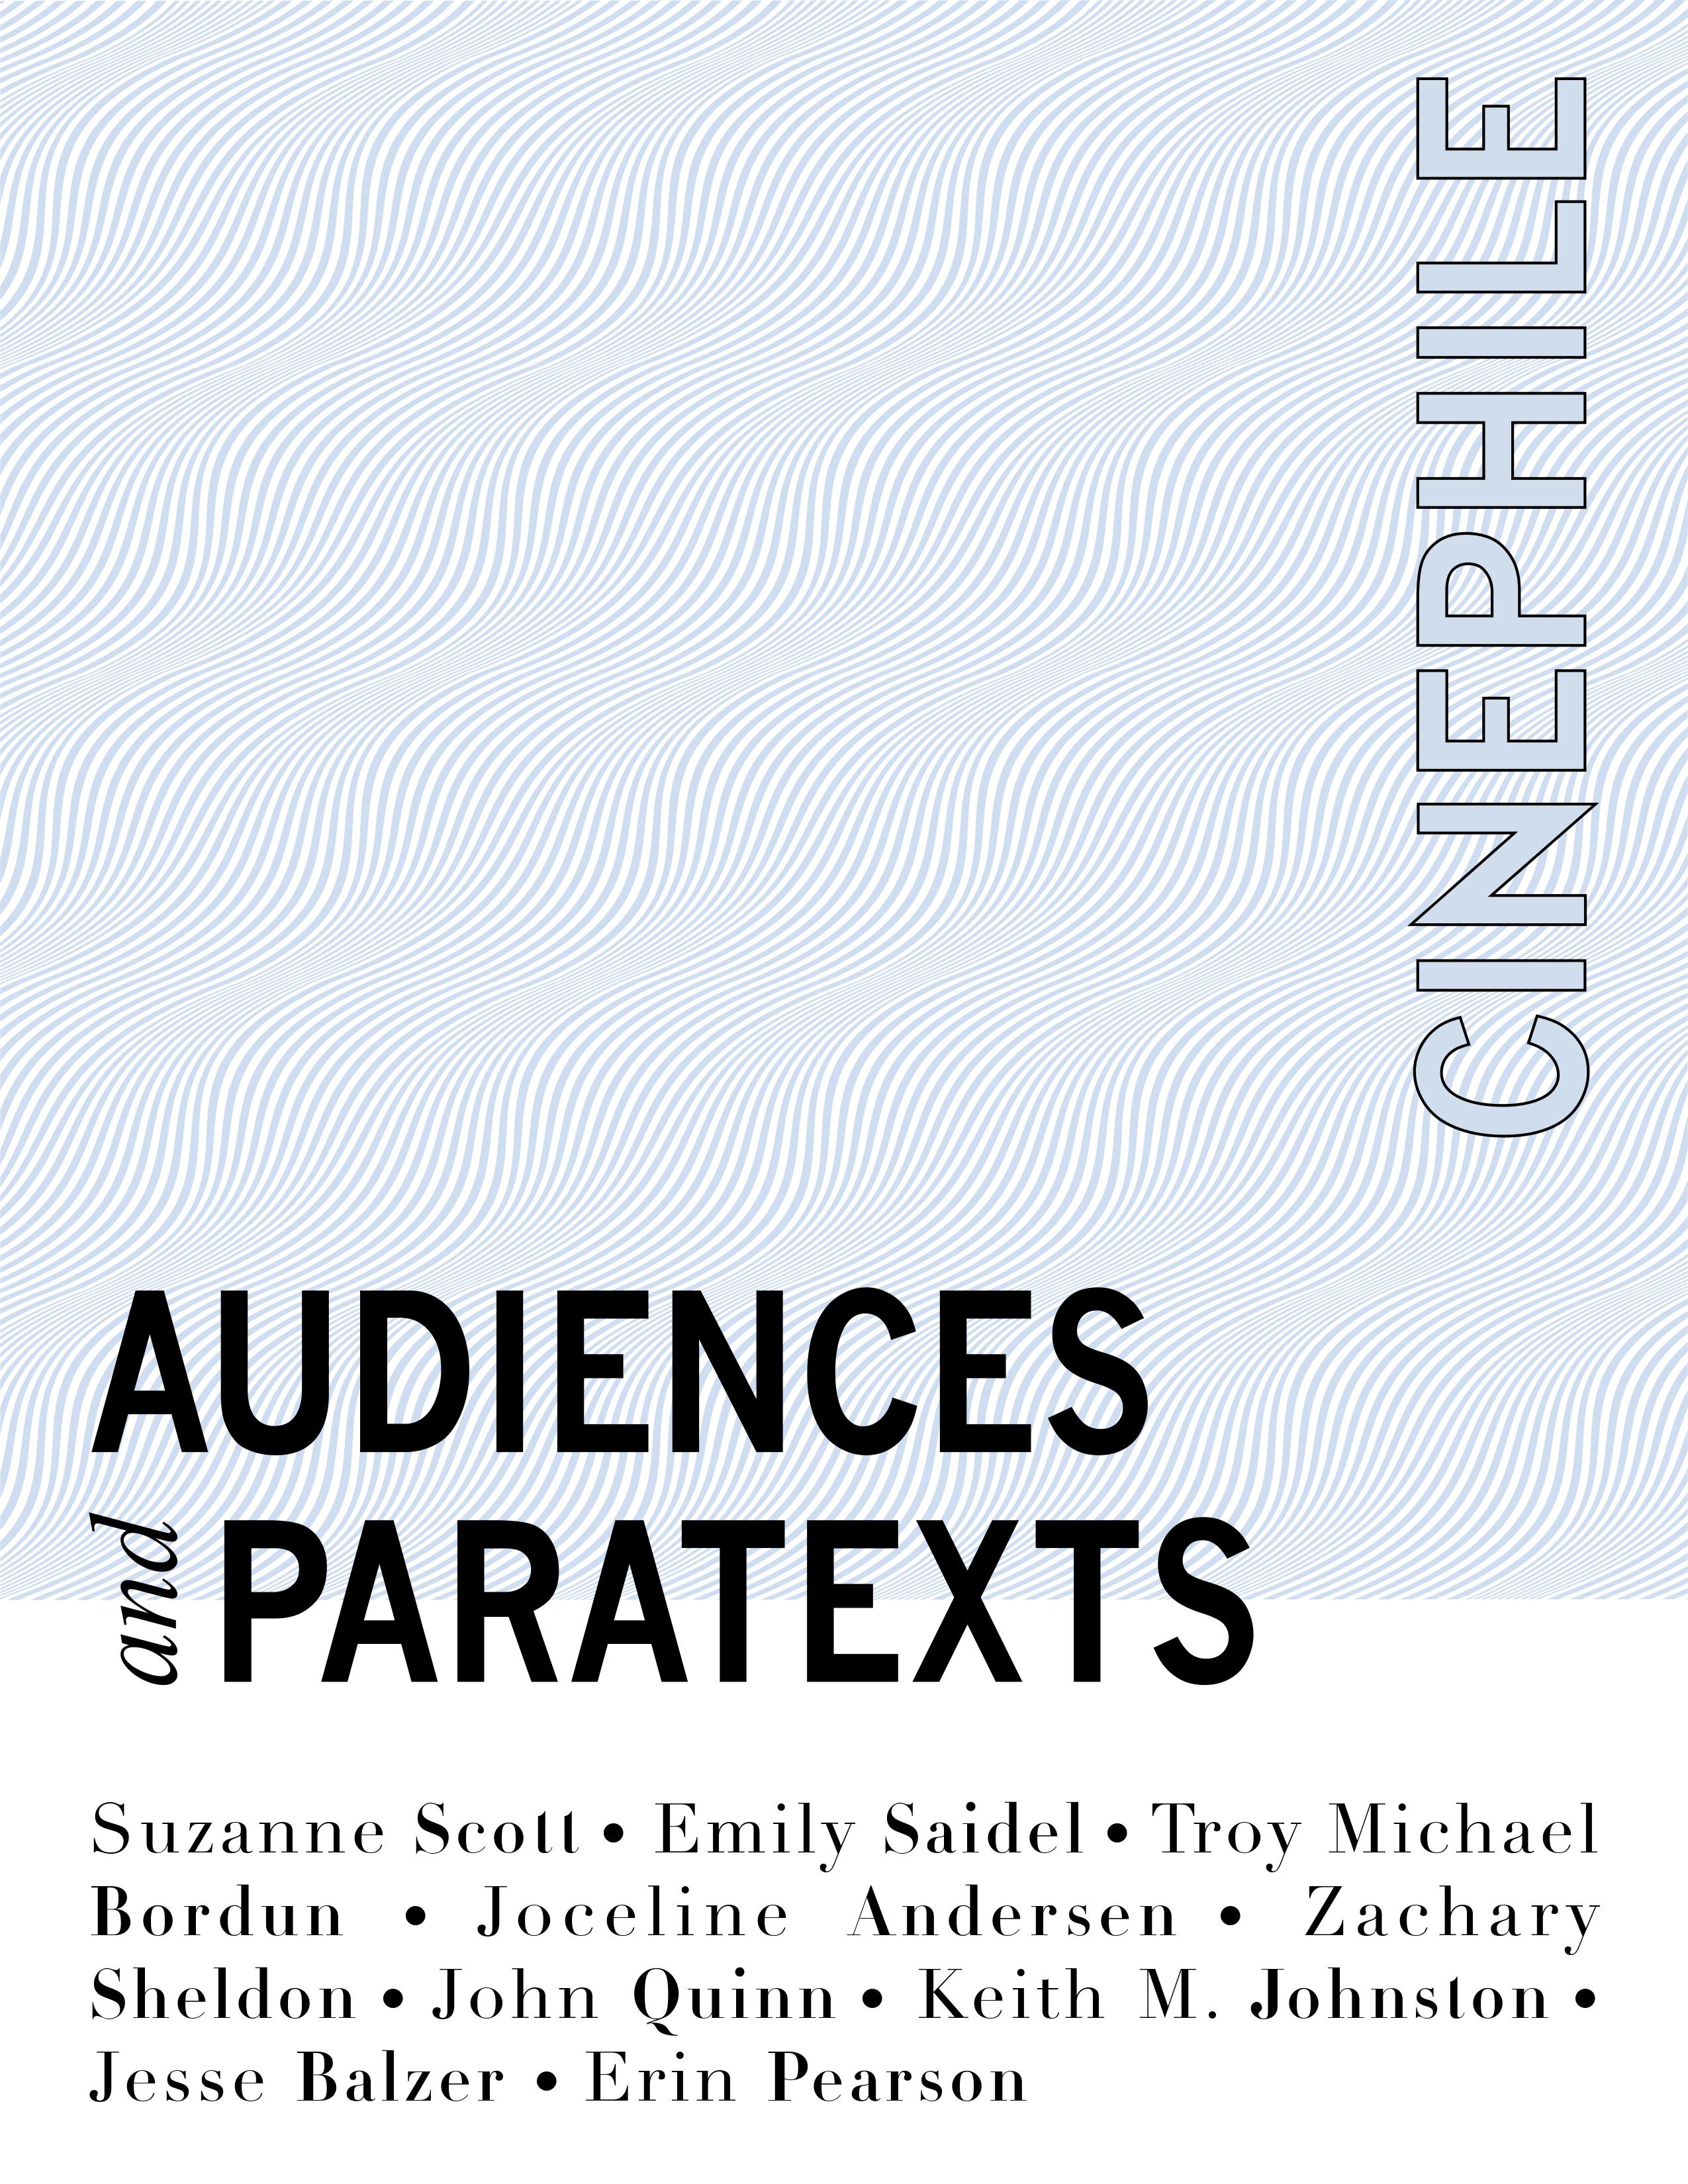 Cinephile 14.1 "Audiences and Paratexts" is now available!